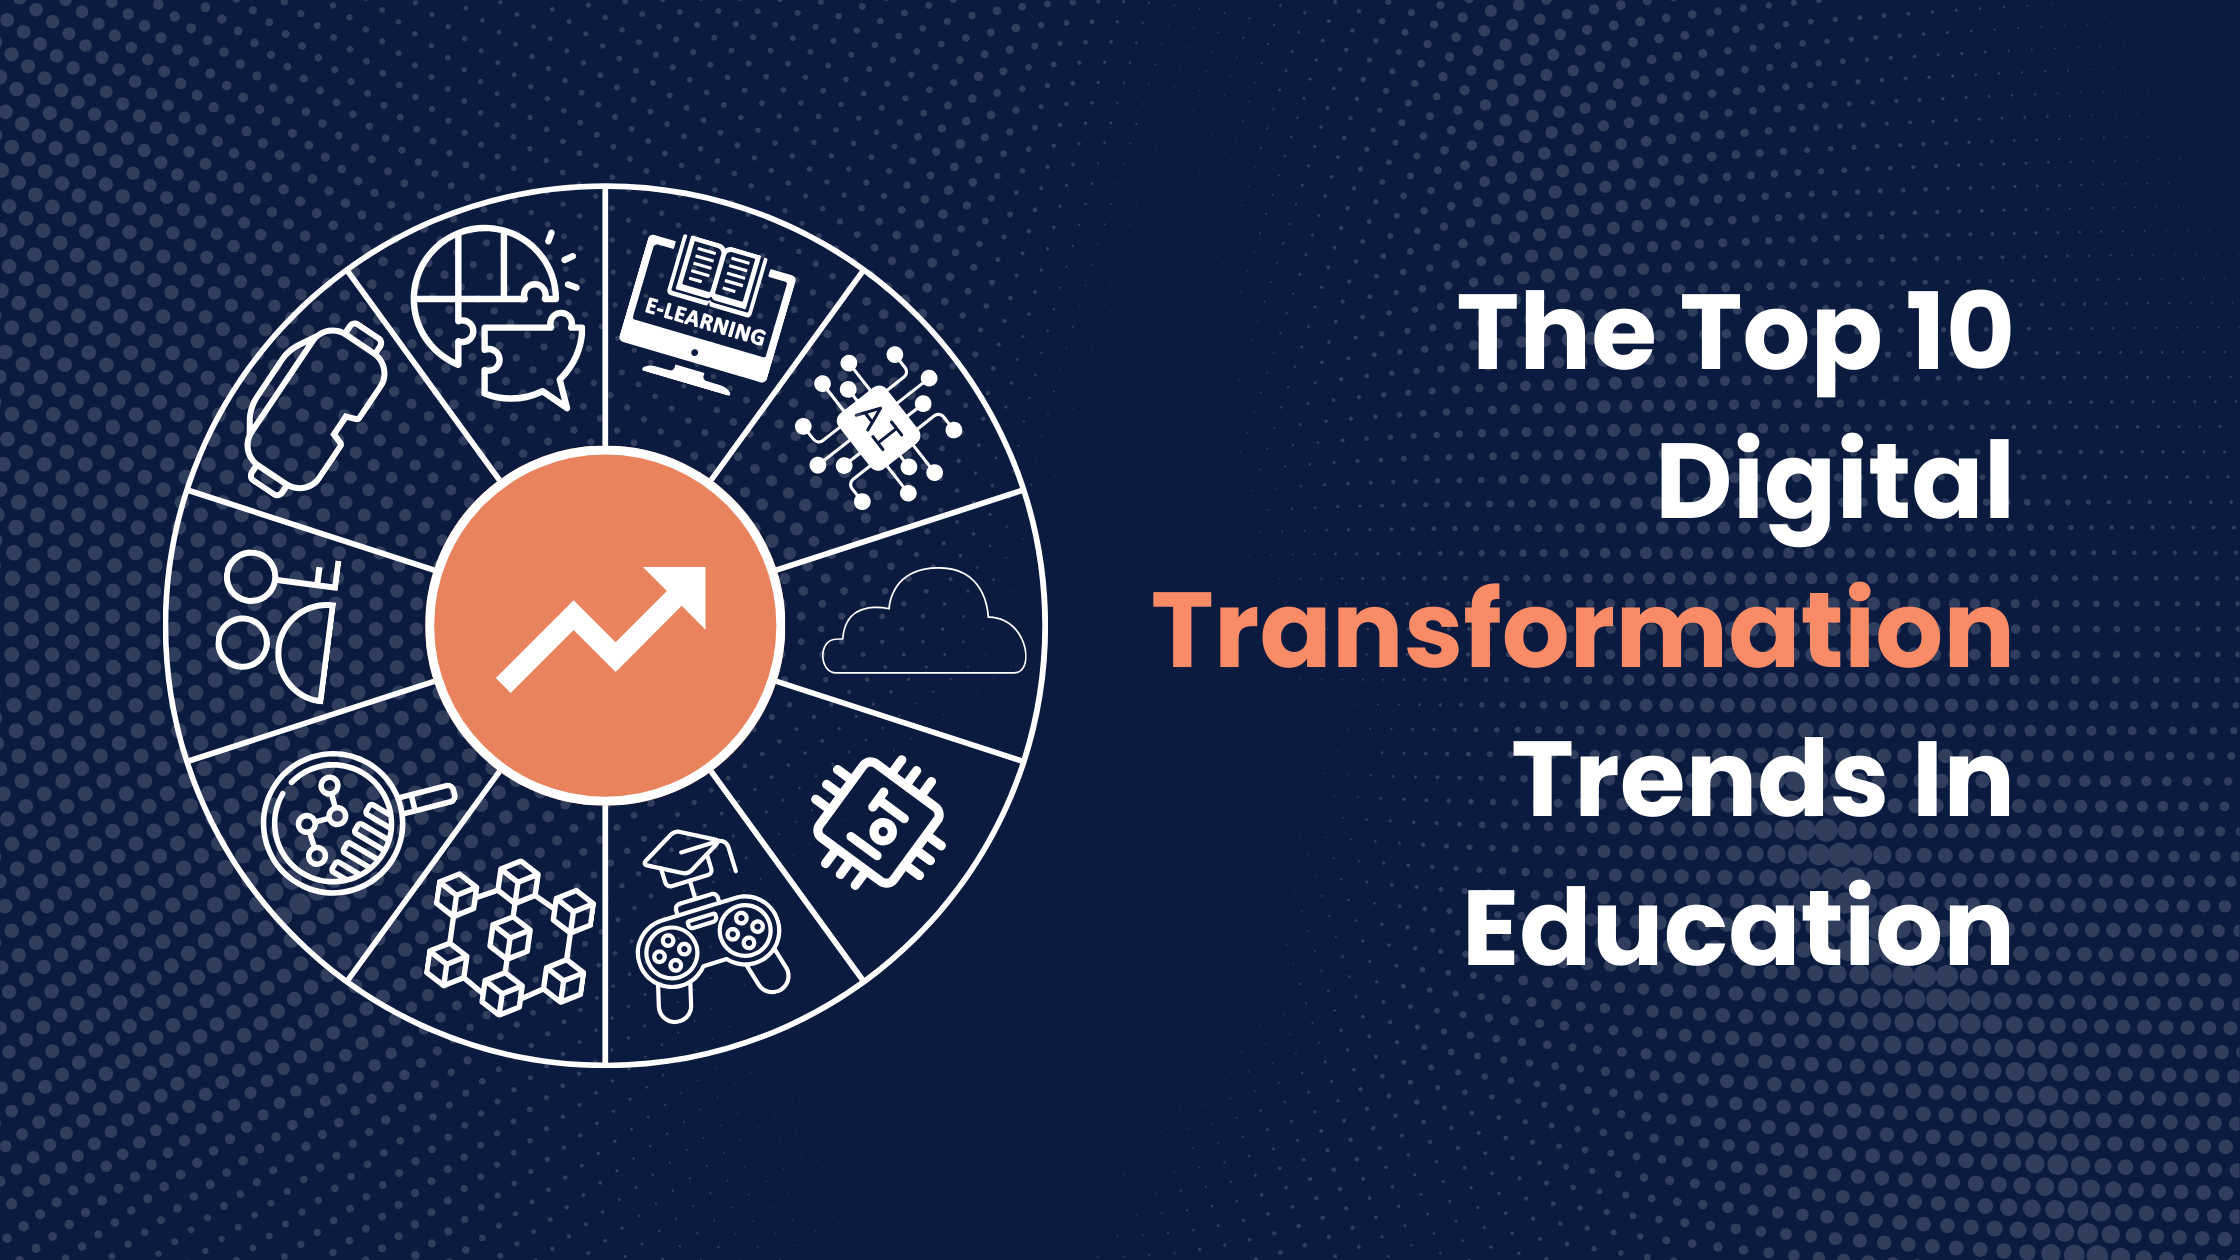 The Top 10 Digital Transformation Trends In Education